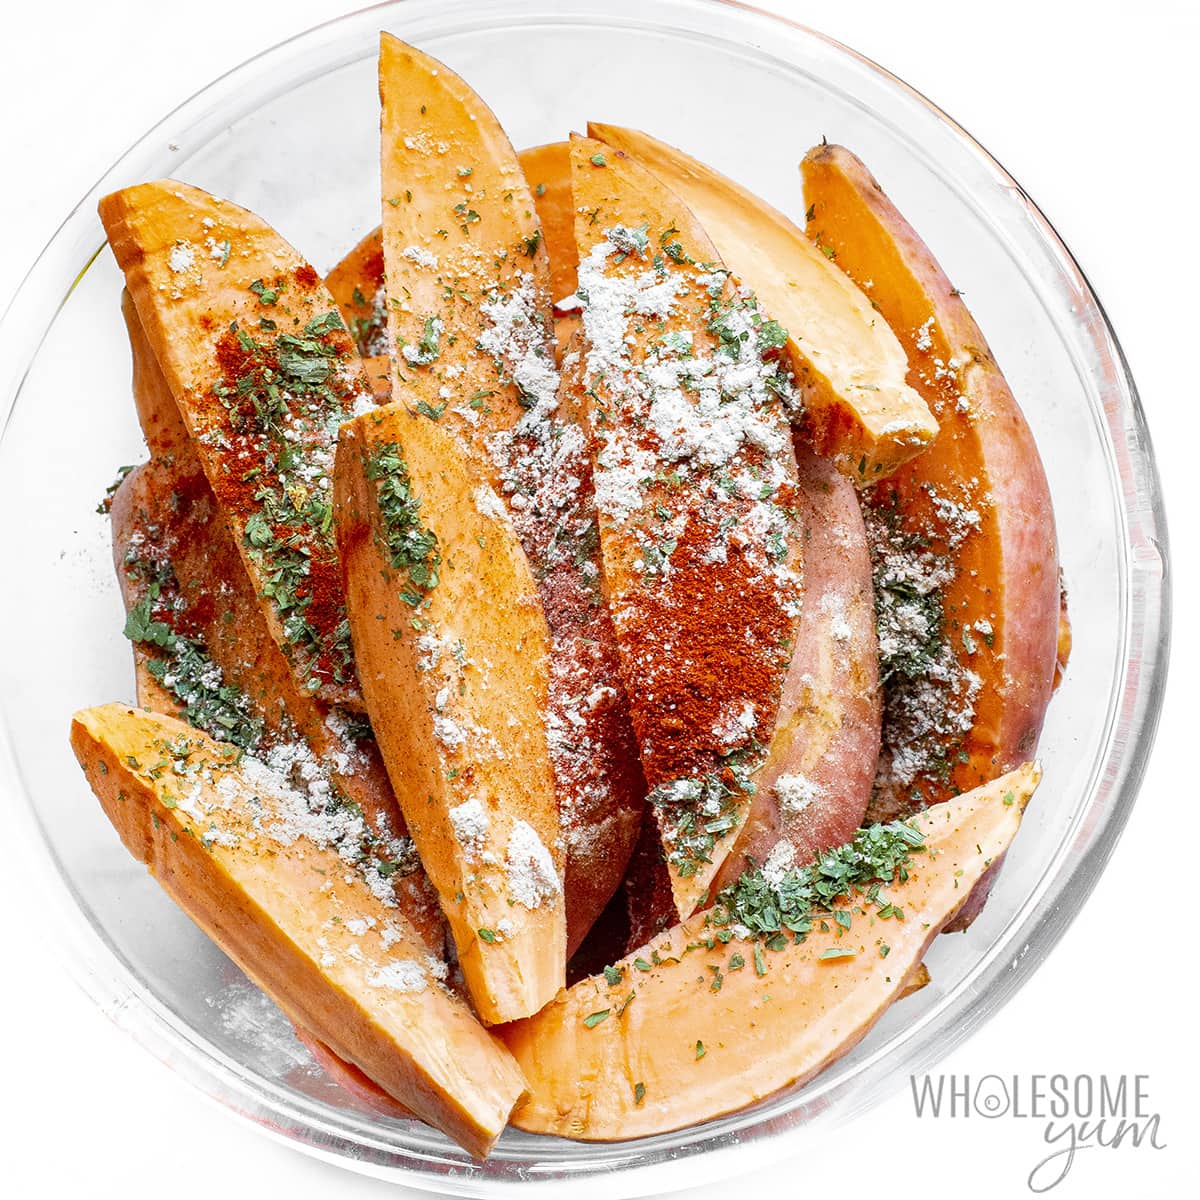 Raw sweet potatoes in a bowl with seasonings.